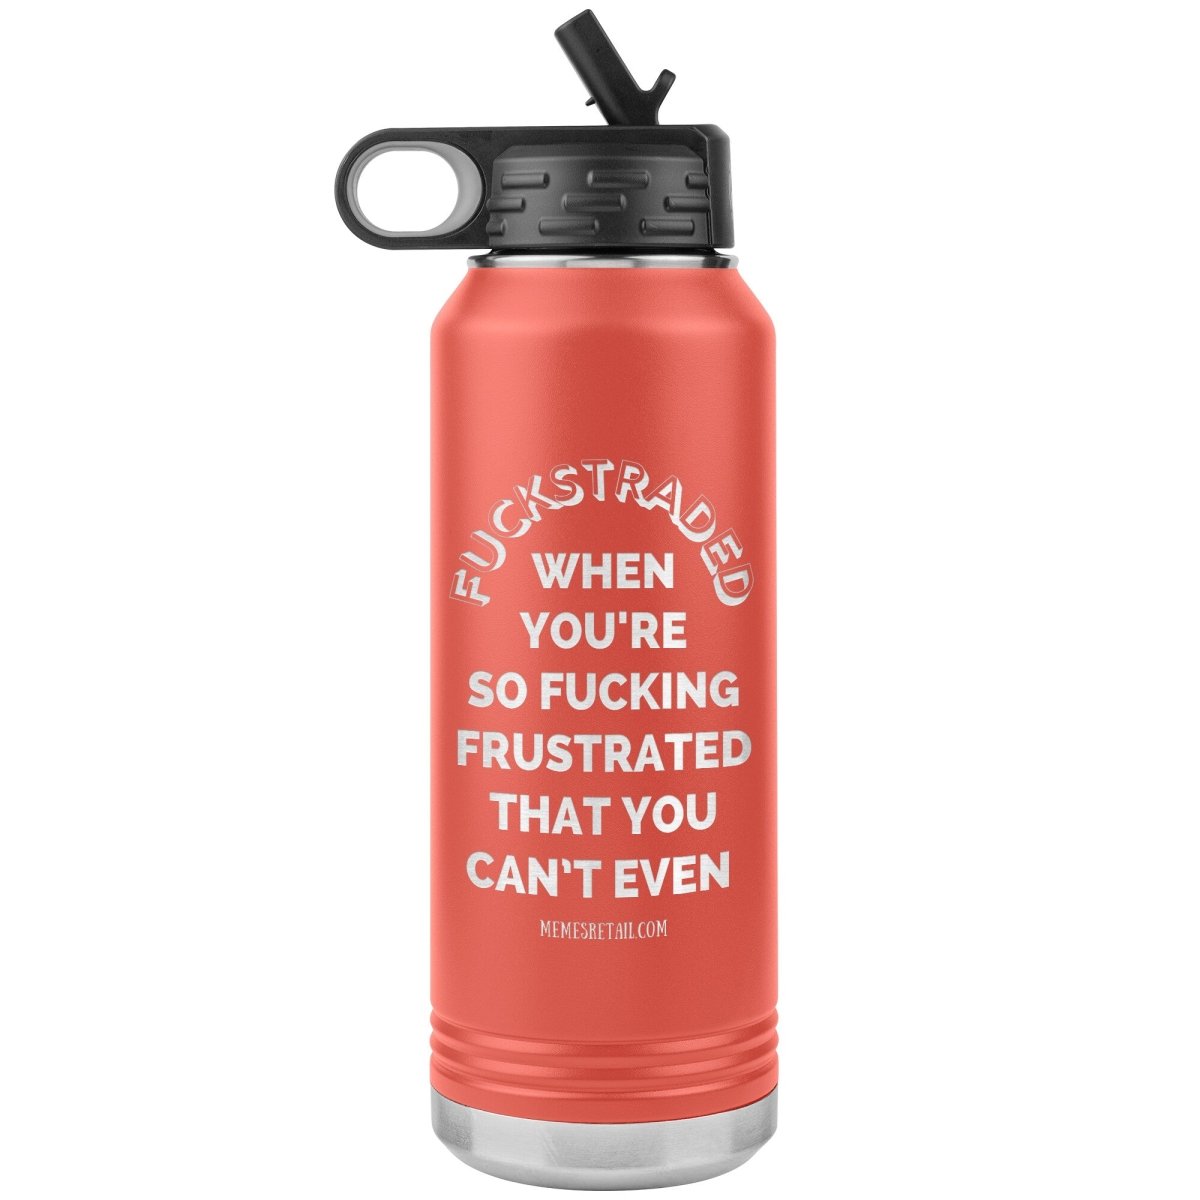 Fuckstraded, When You're So Fucking Frustrated That You Can’t Even - 32oz Water Tumblers, Coral - MemesRetail.com